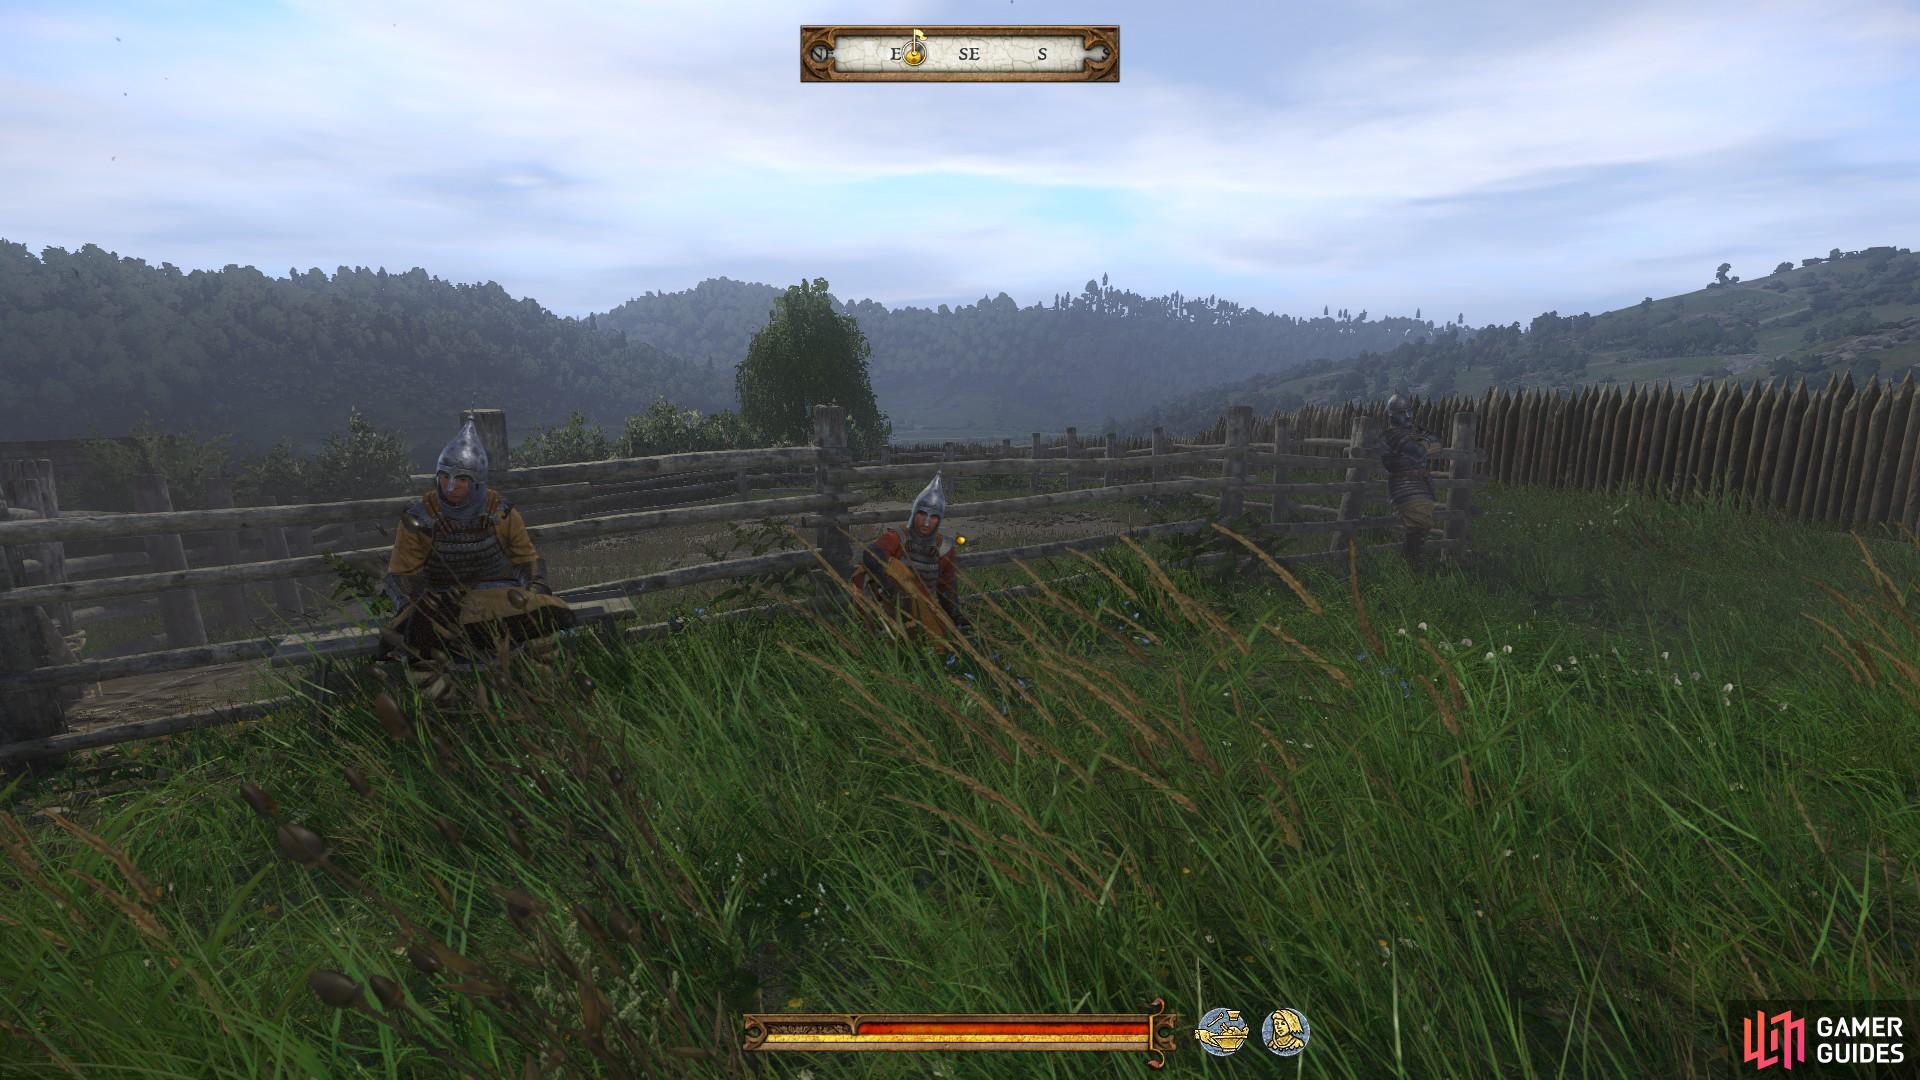 You will find Odd Bird waiting with three bandit brawlers, all dressed as Cumans, at the combat arena in Skalitz.